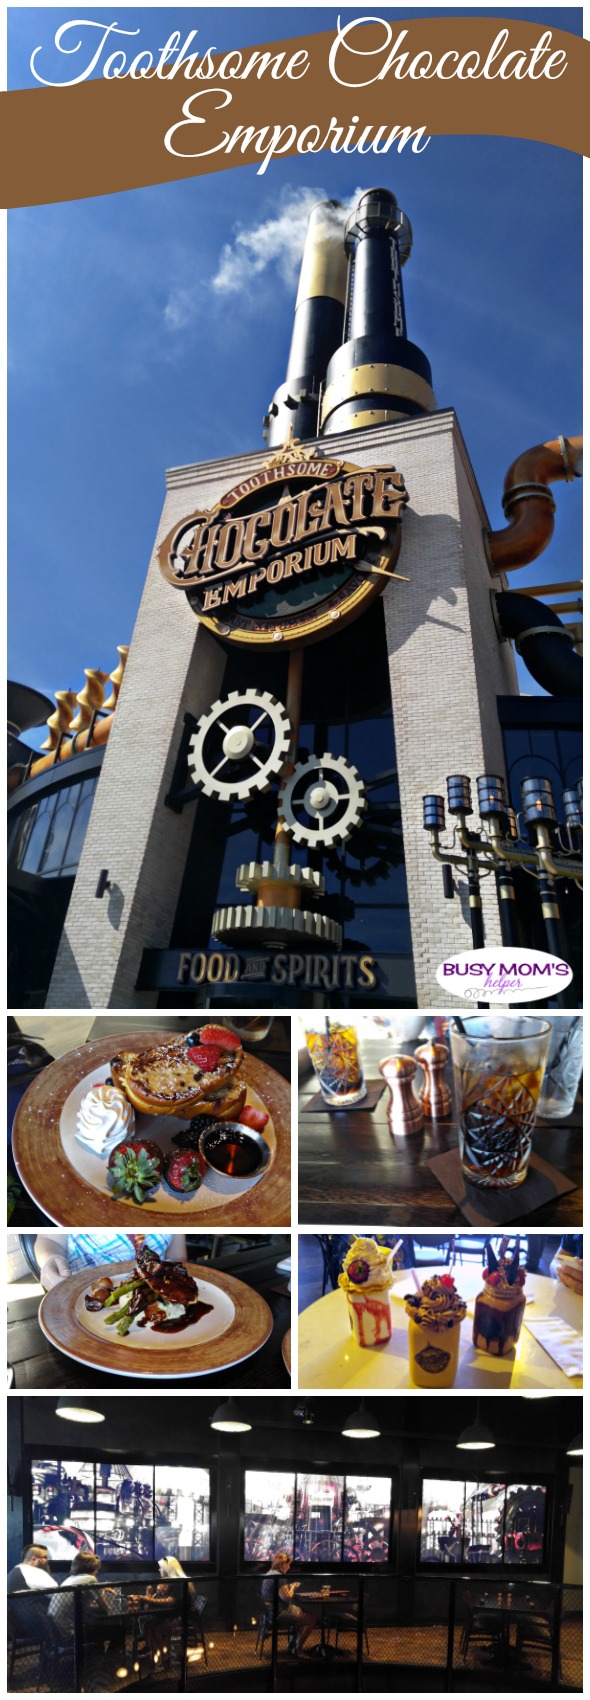 Toothsome Chocolate Emporium & Savory Feast Kitchen - check out why this is my new favorite Universal Orlando City Walk restaurant! (I was provided reservations, but this was not sponsored in any way)